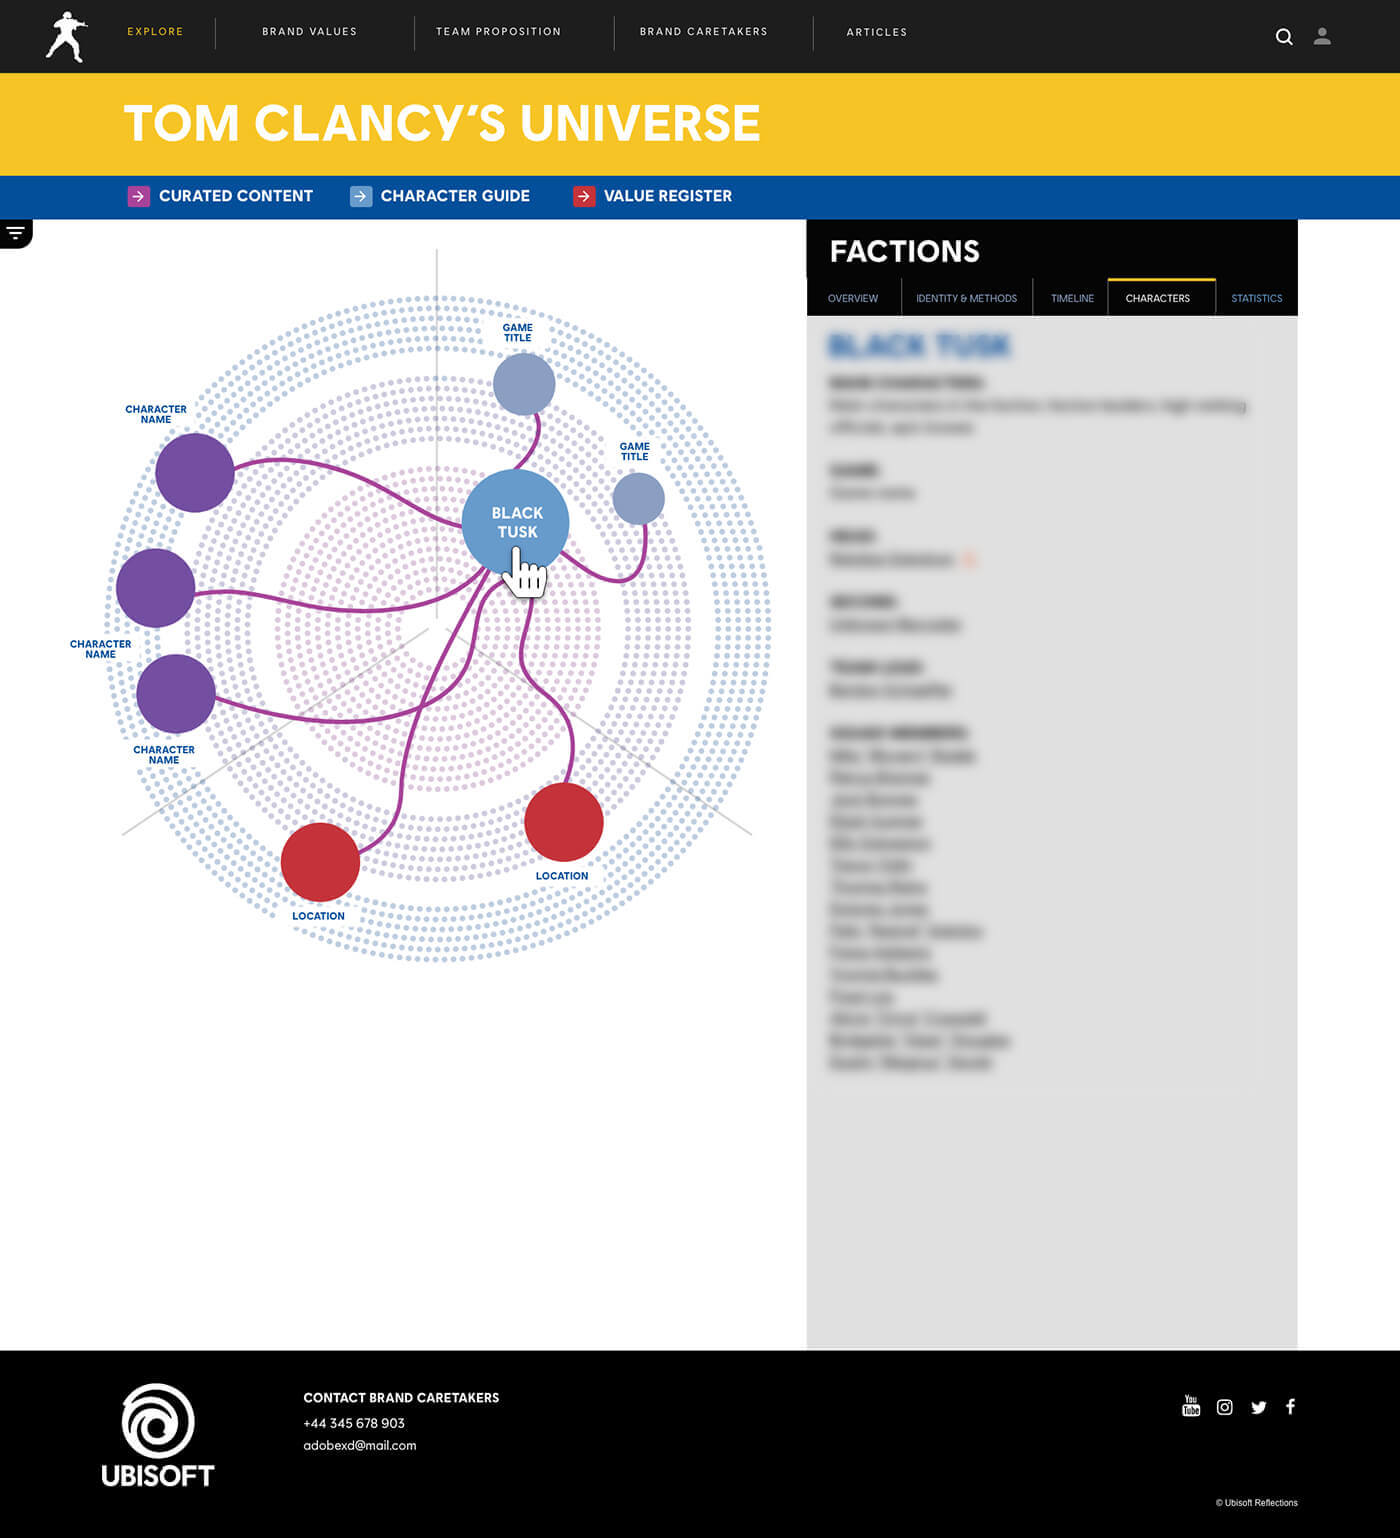 Tom Clancy Web 1920 – explore #FACTIONS CHARACTERS updated